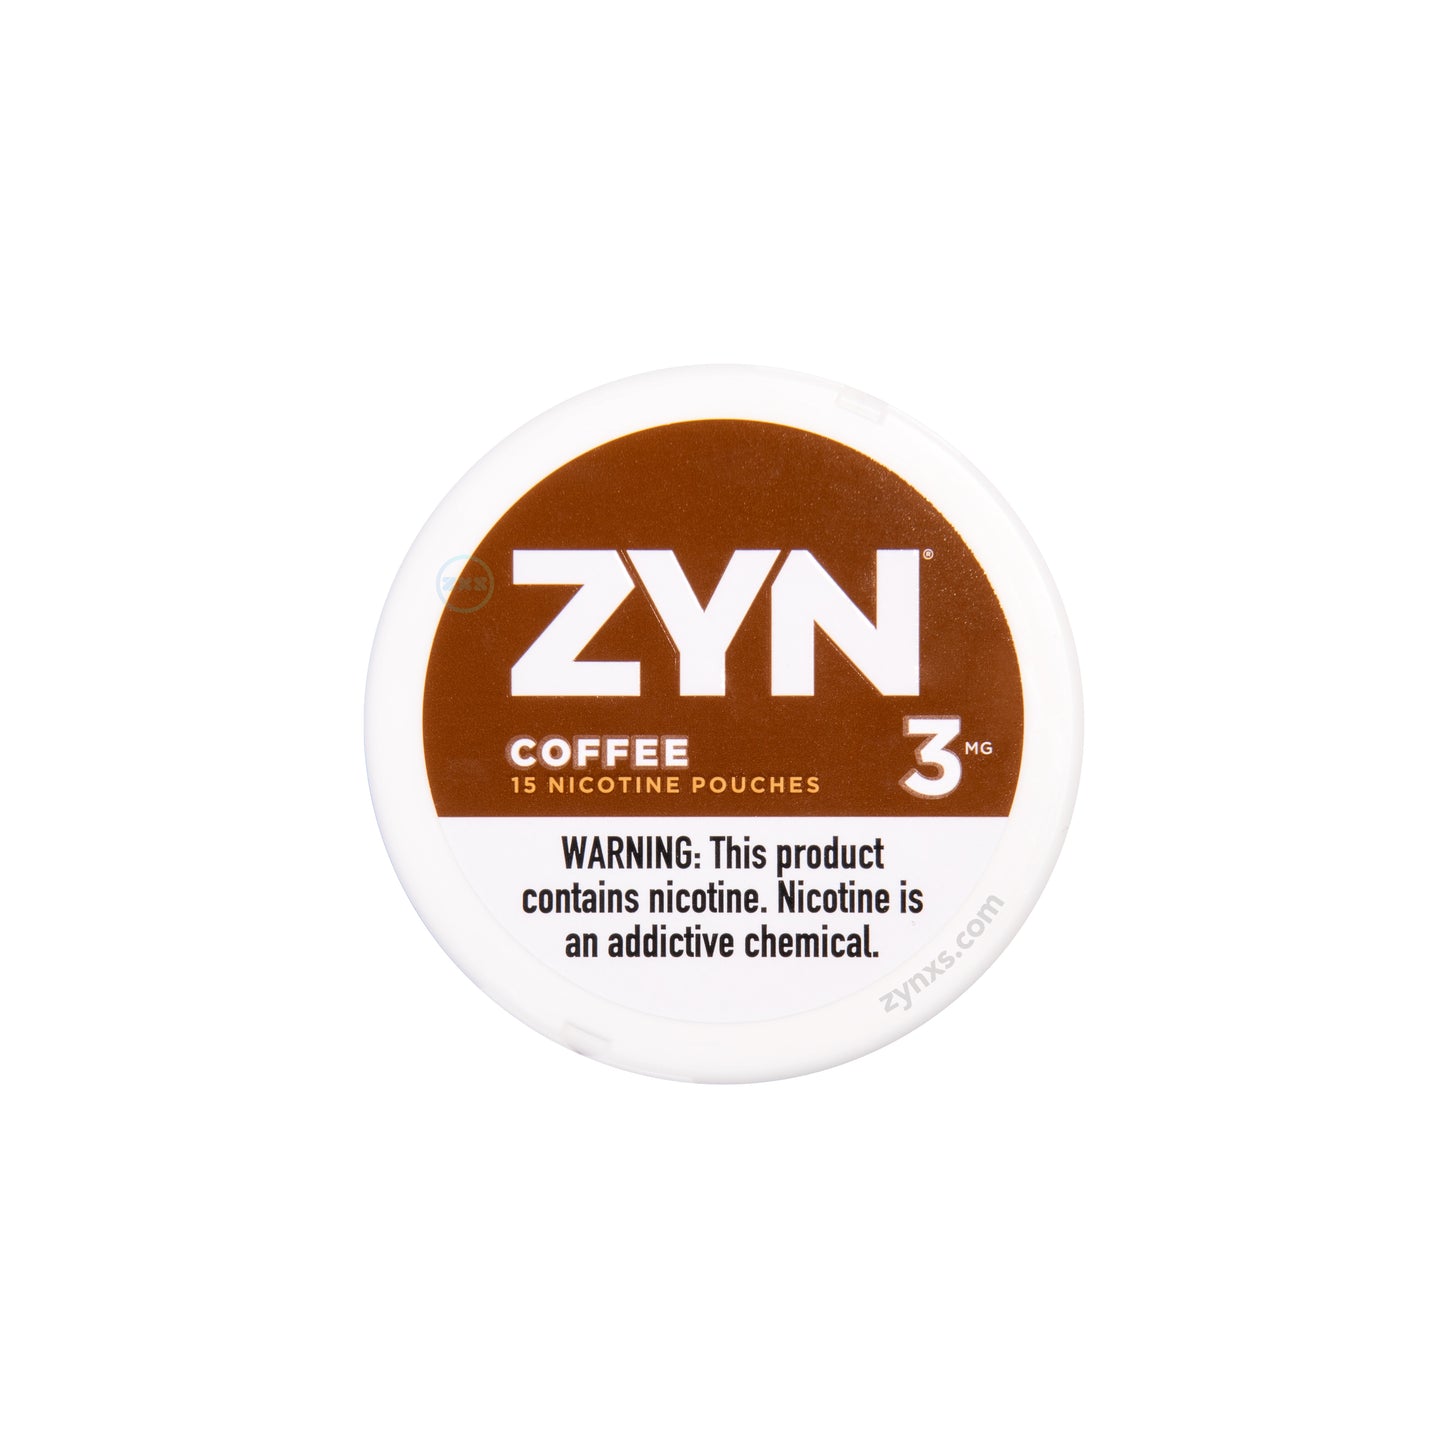 Zyn Coffee 3 MG nicotine pouches packaging. The package has a rich brown and black color theme, reflecting the coffee flavor.